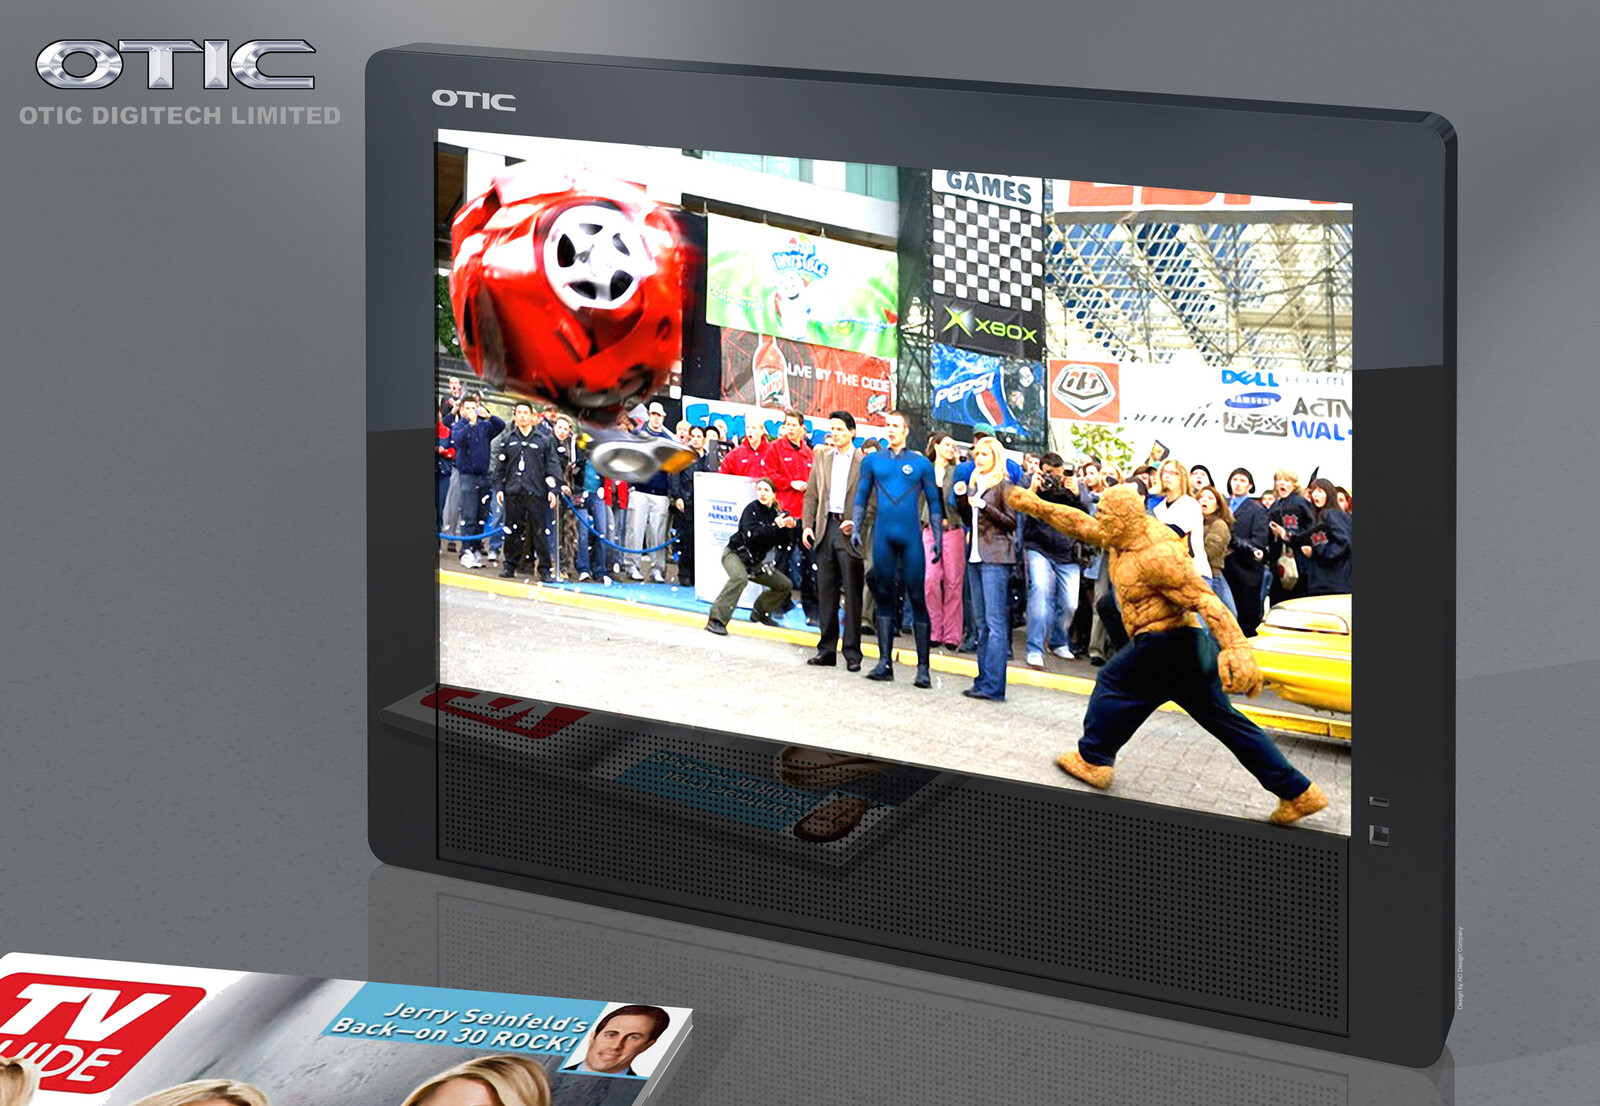 💎 Portable Mini LED TV | Design by Leung Chung Kwan on 2008 💎
Brand Name︰OTIC | Client︰OTIC Limited